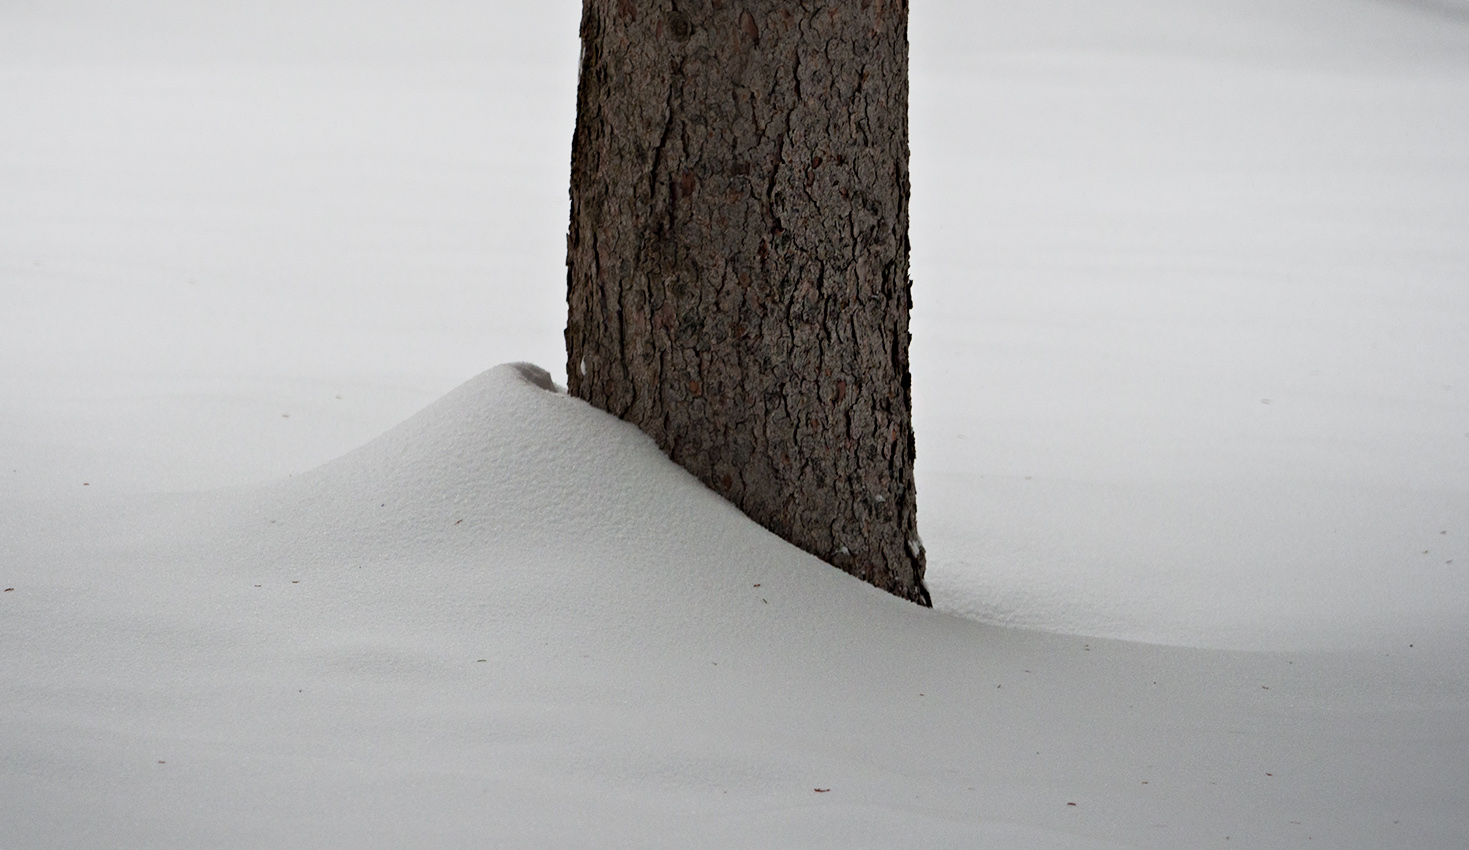 Snow & tree trunk - February in Connecticut